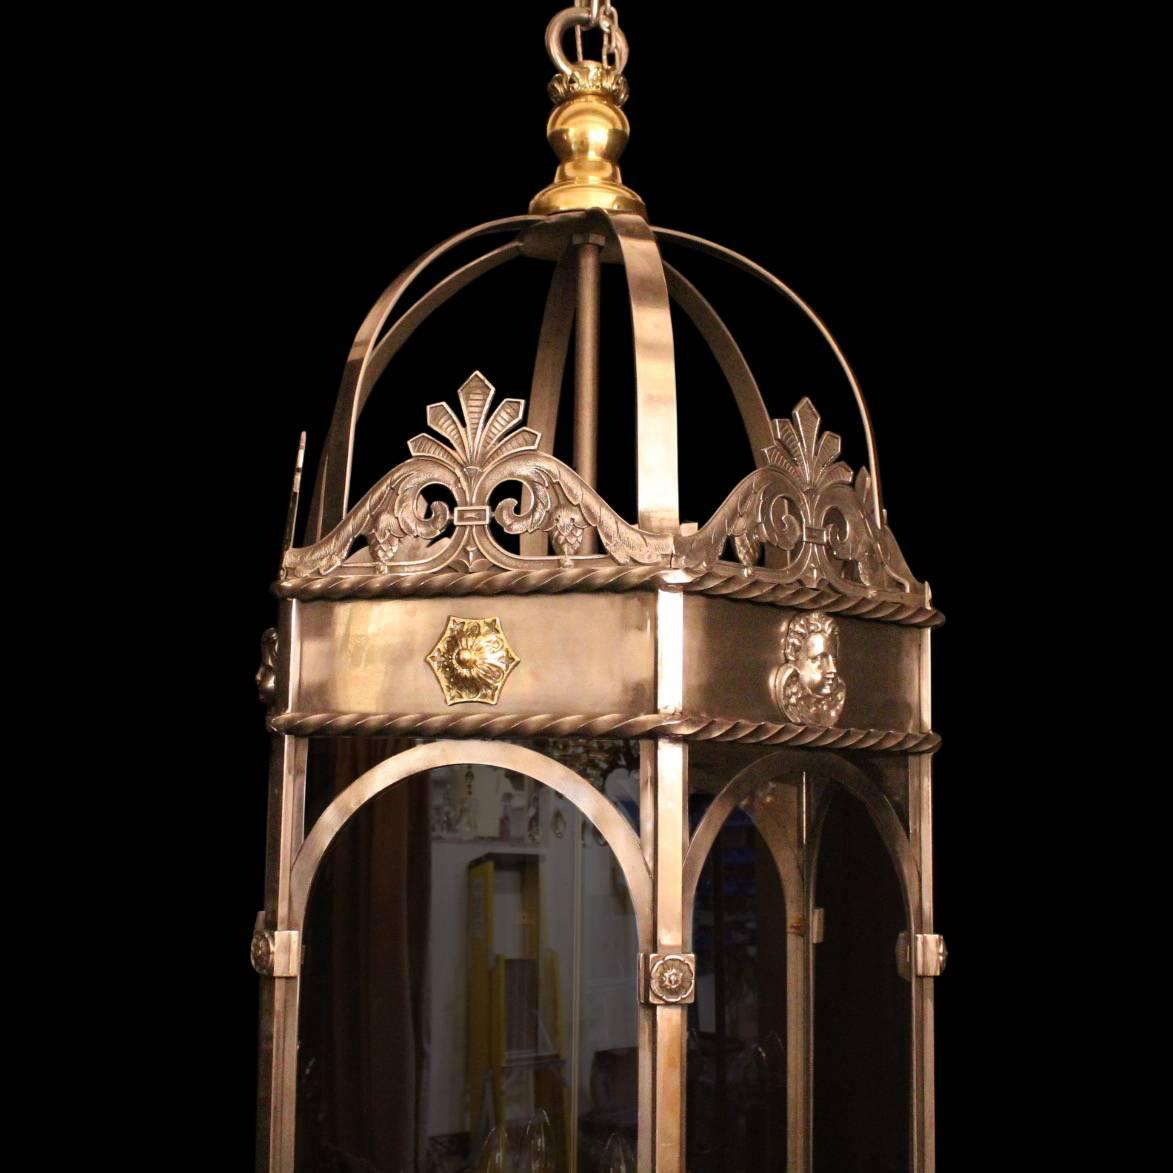 A monumental French Eight light brass and polished wrought iron hexagonal antique lantern, the six glass panels held within a decoratively cast barley twist framework with 8 internal double tiered light fittings, having decorative pierced central